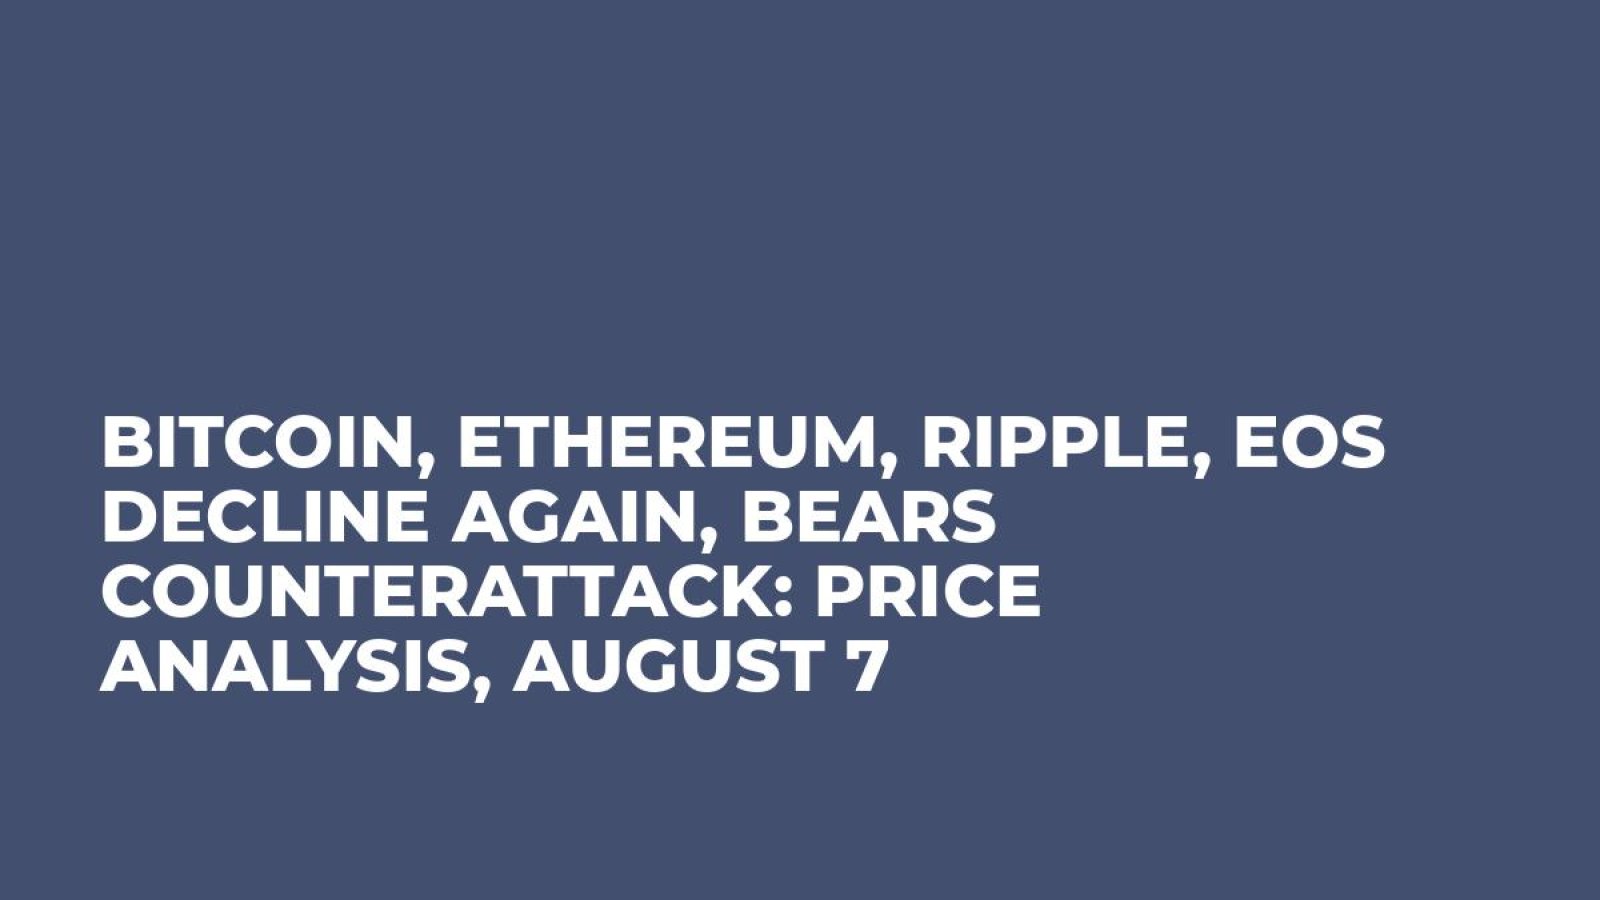 Bitcoin, Ethereum, Ripple, EOS Decline Again, Bears Counterattack: Price Analysis, August 7